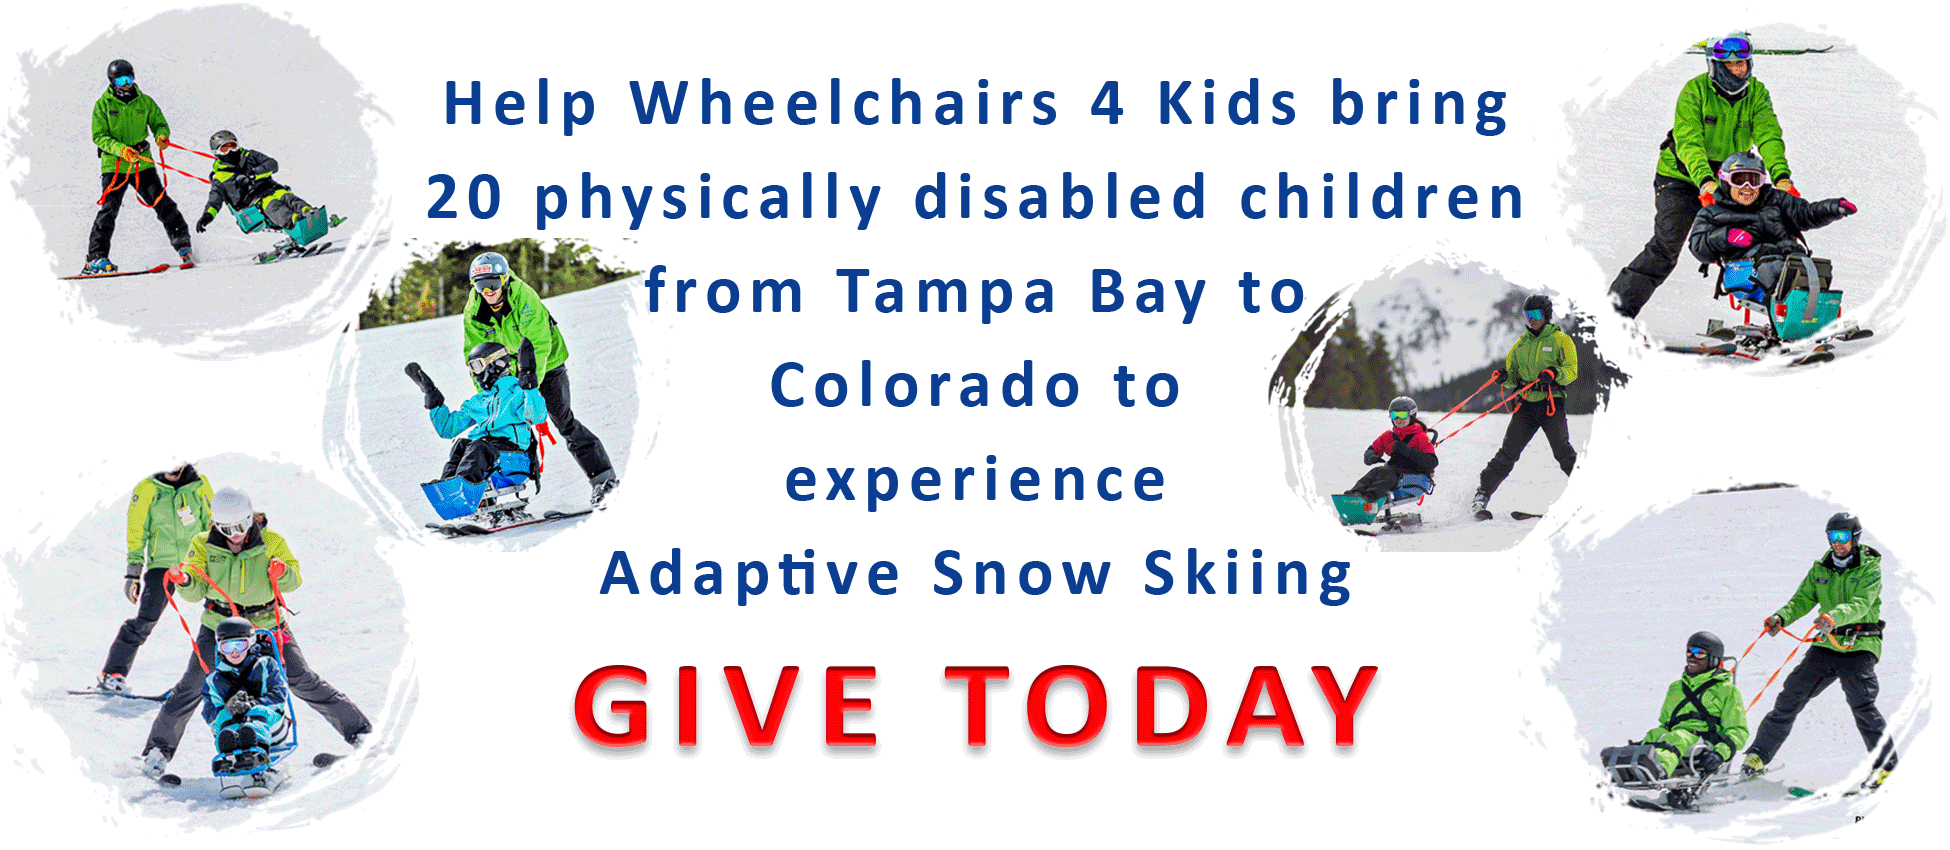 Help Wheelchairs 4 Kids bring 20 physically disabled children from Tampa Bay to Colorado to experience Adaptive Snow Skiing by donating today!